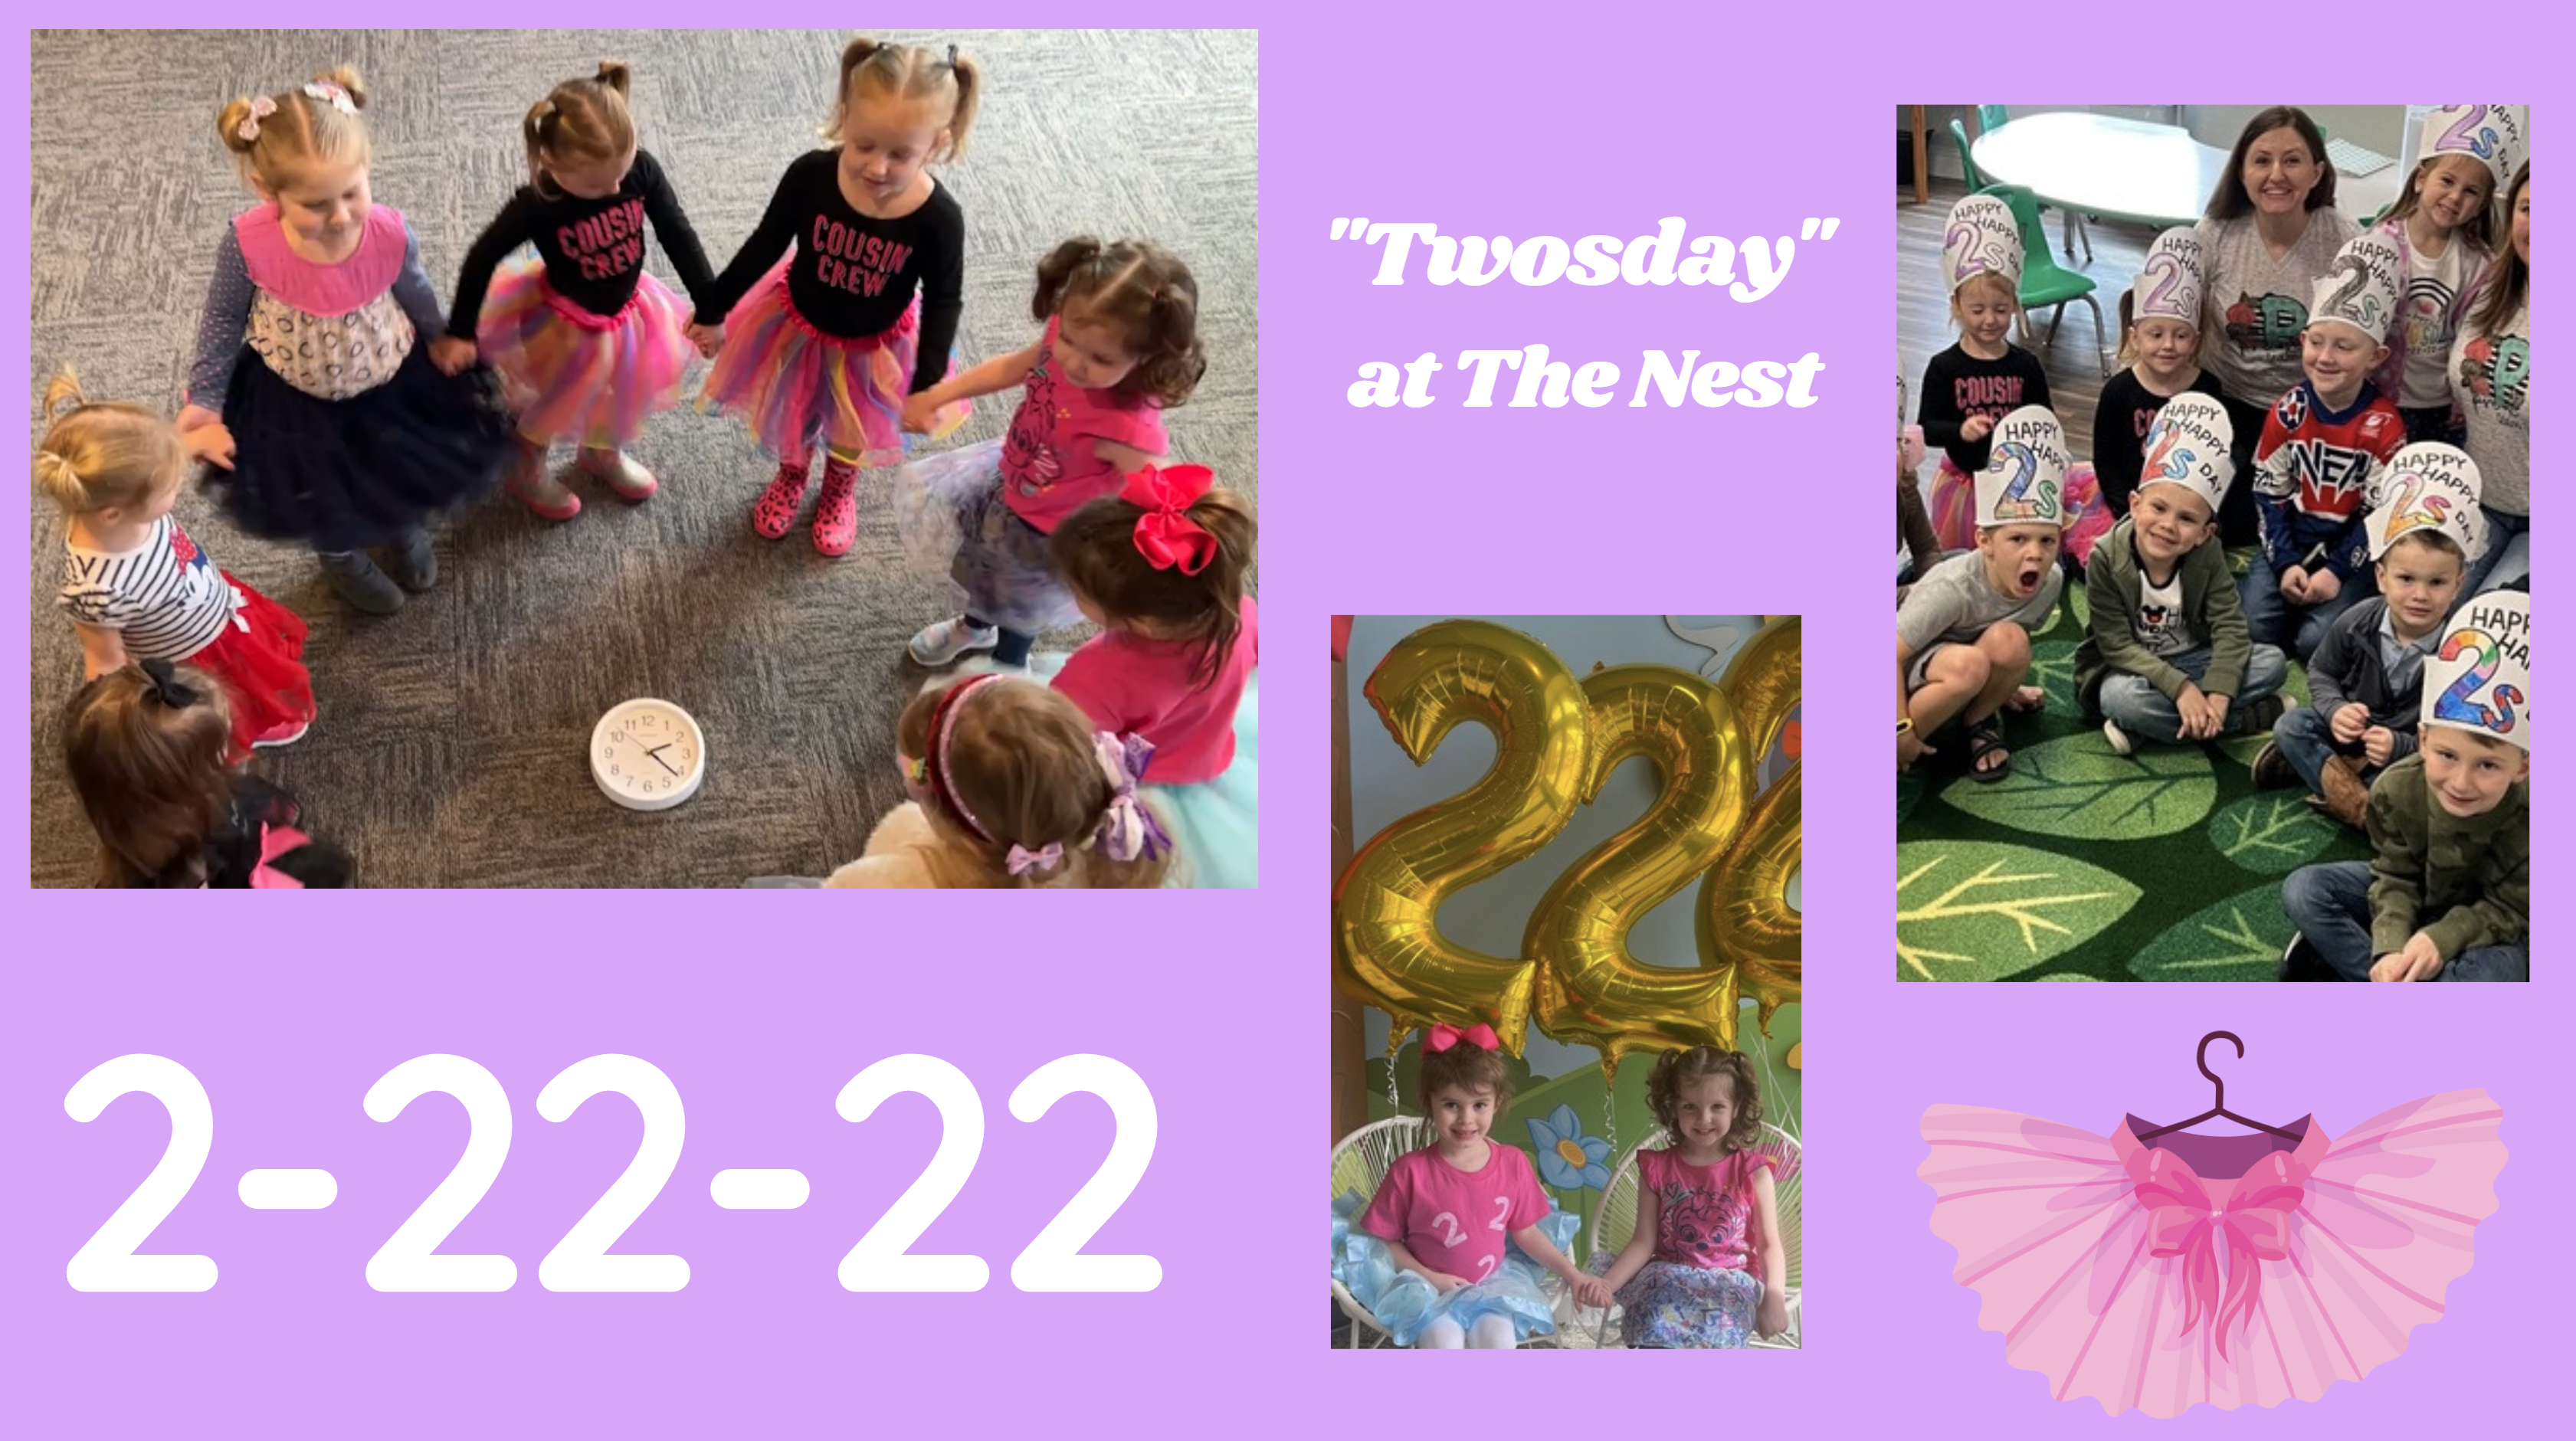 “Twos”day Fun at The Nest